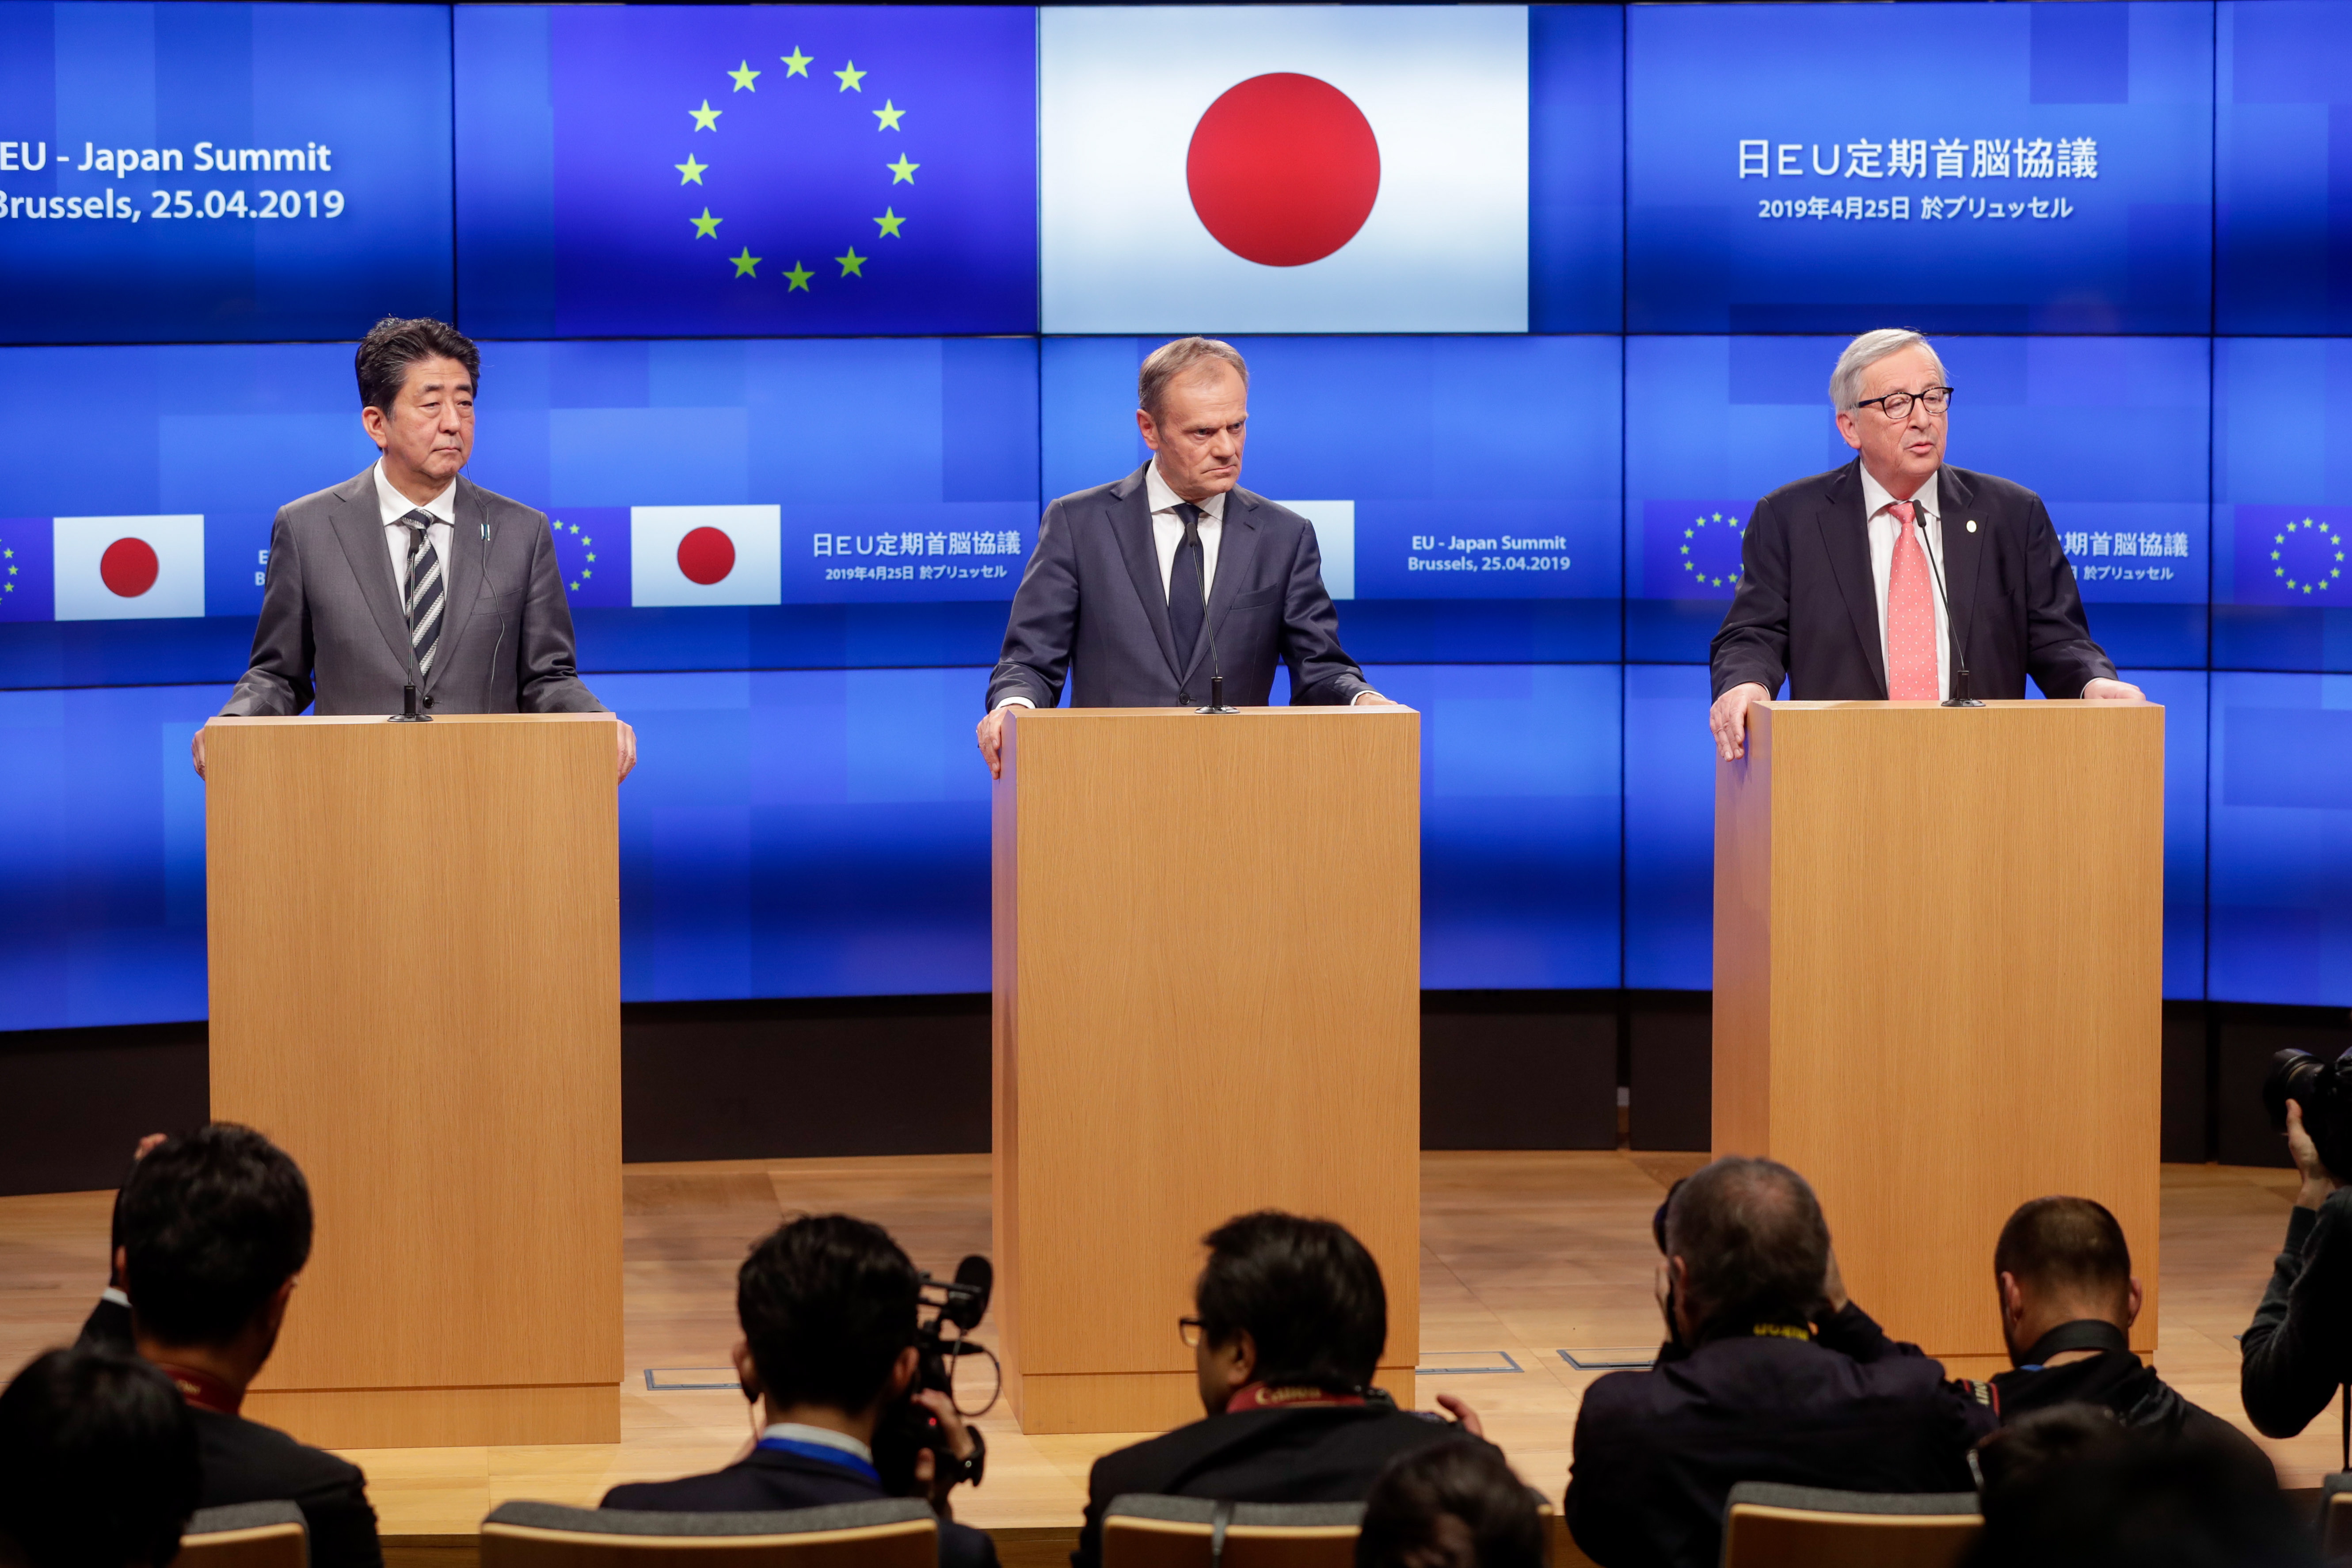 epa07528143 (L-R) Japanese Prime Minister Shinzo Abe, European Council President Donald Tusk, and European Commission President Jean-Claude Juncker give a joint press conference at the end of a EU-Japan summit meeting at the European Council in Brussels, Belgium, 25 April 2019. Abe is on an international tour preparing the G20 Summit and discussed trade, bilateral ties and North Korea.  EPA/STEPHANIE LECOCQ